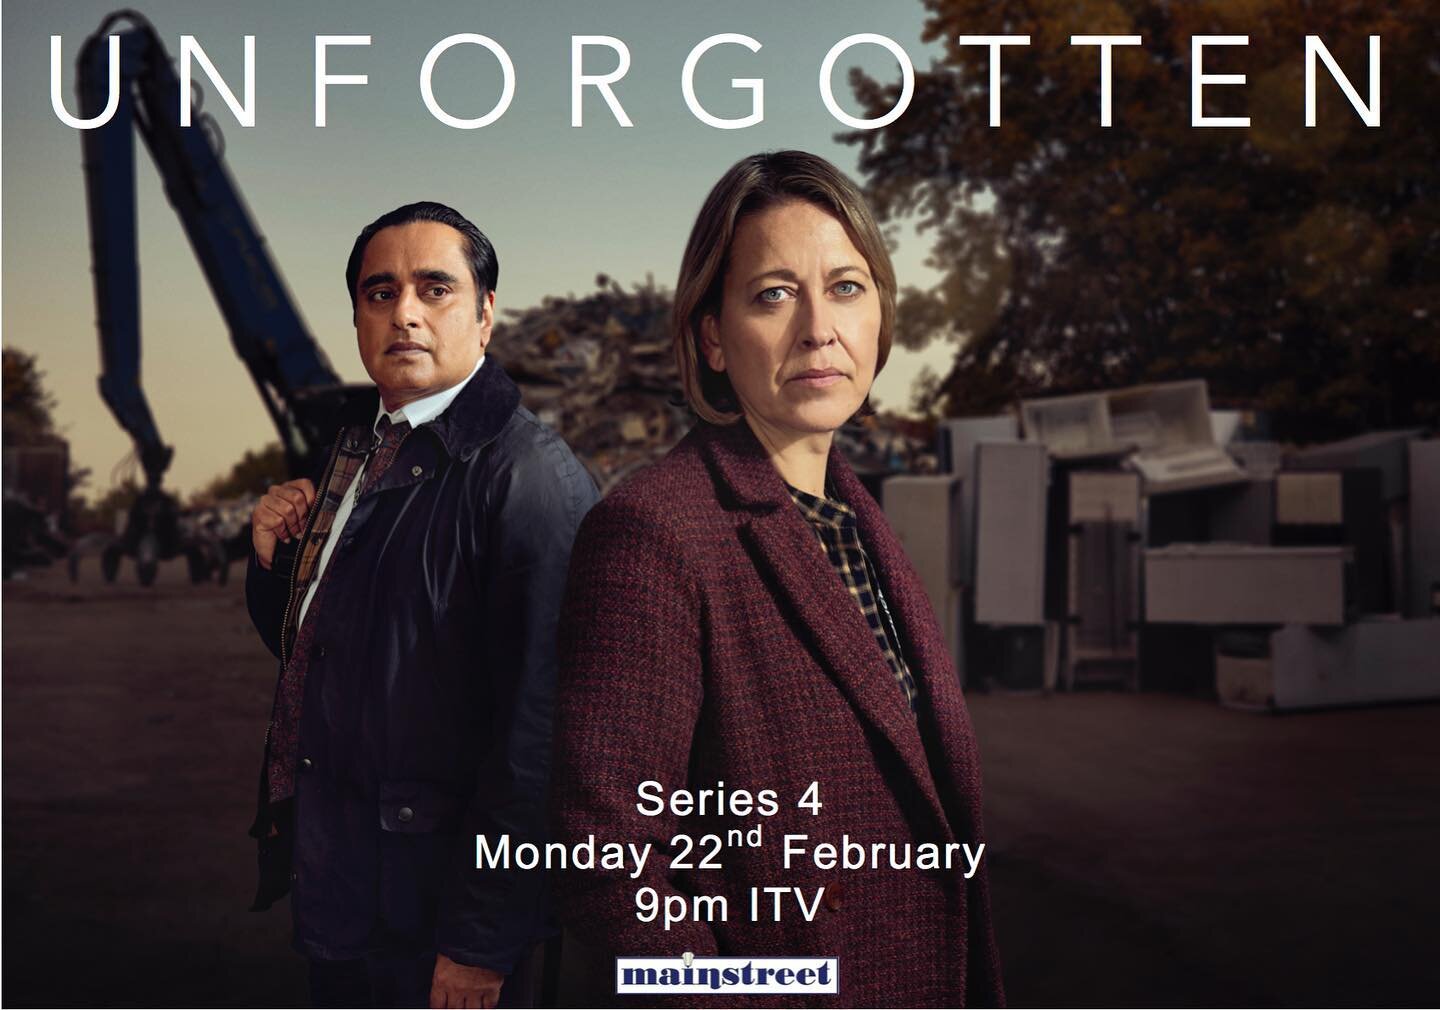 Cassie and Sunny are back! #Unforgotten returns Monday 22nd Feb at 9pm on @itv